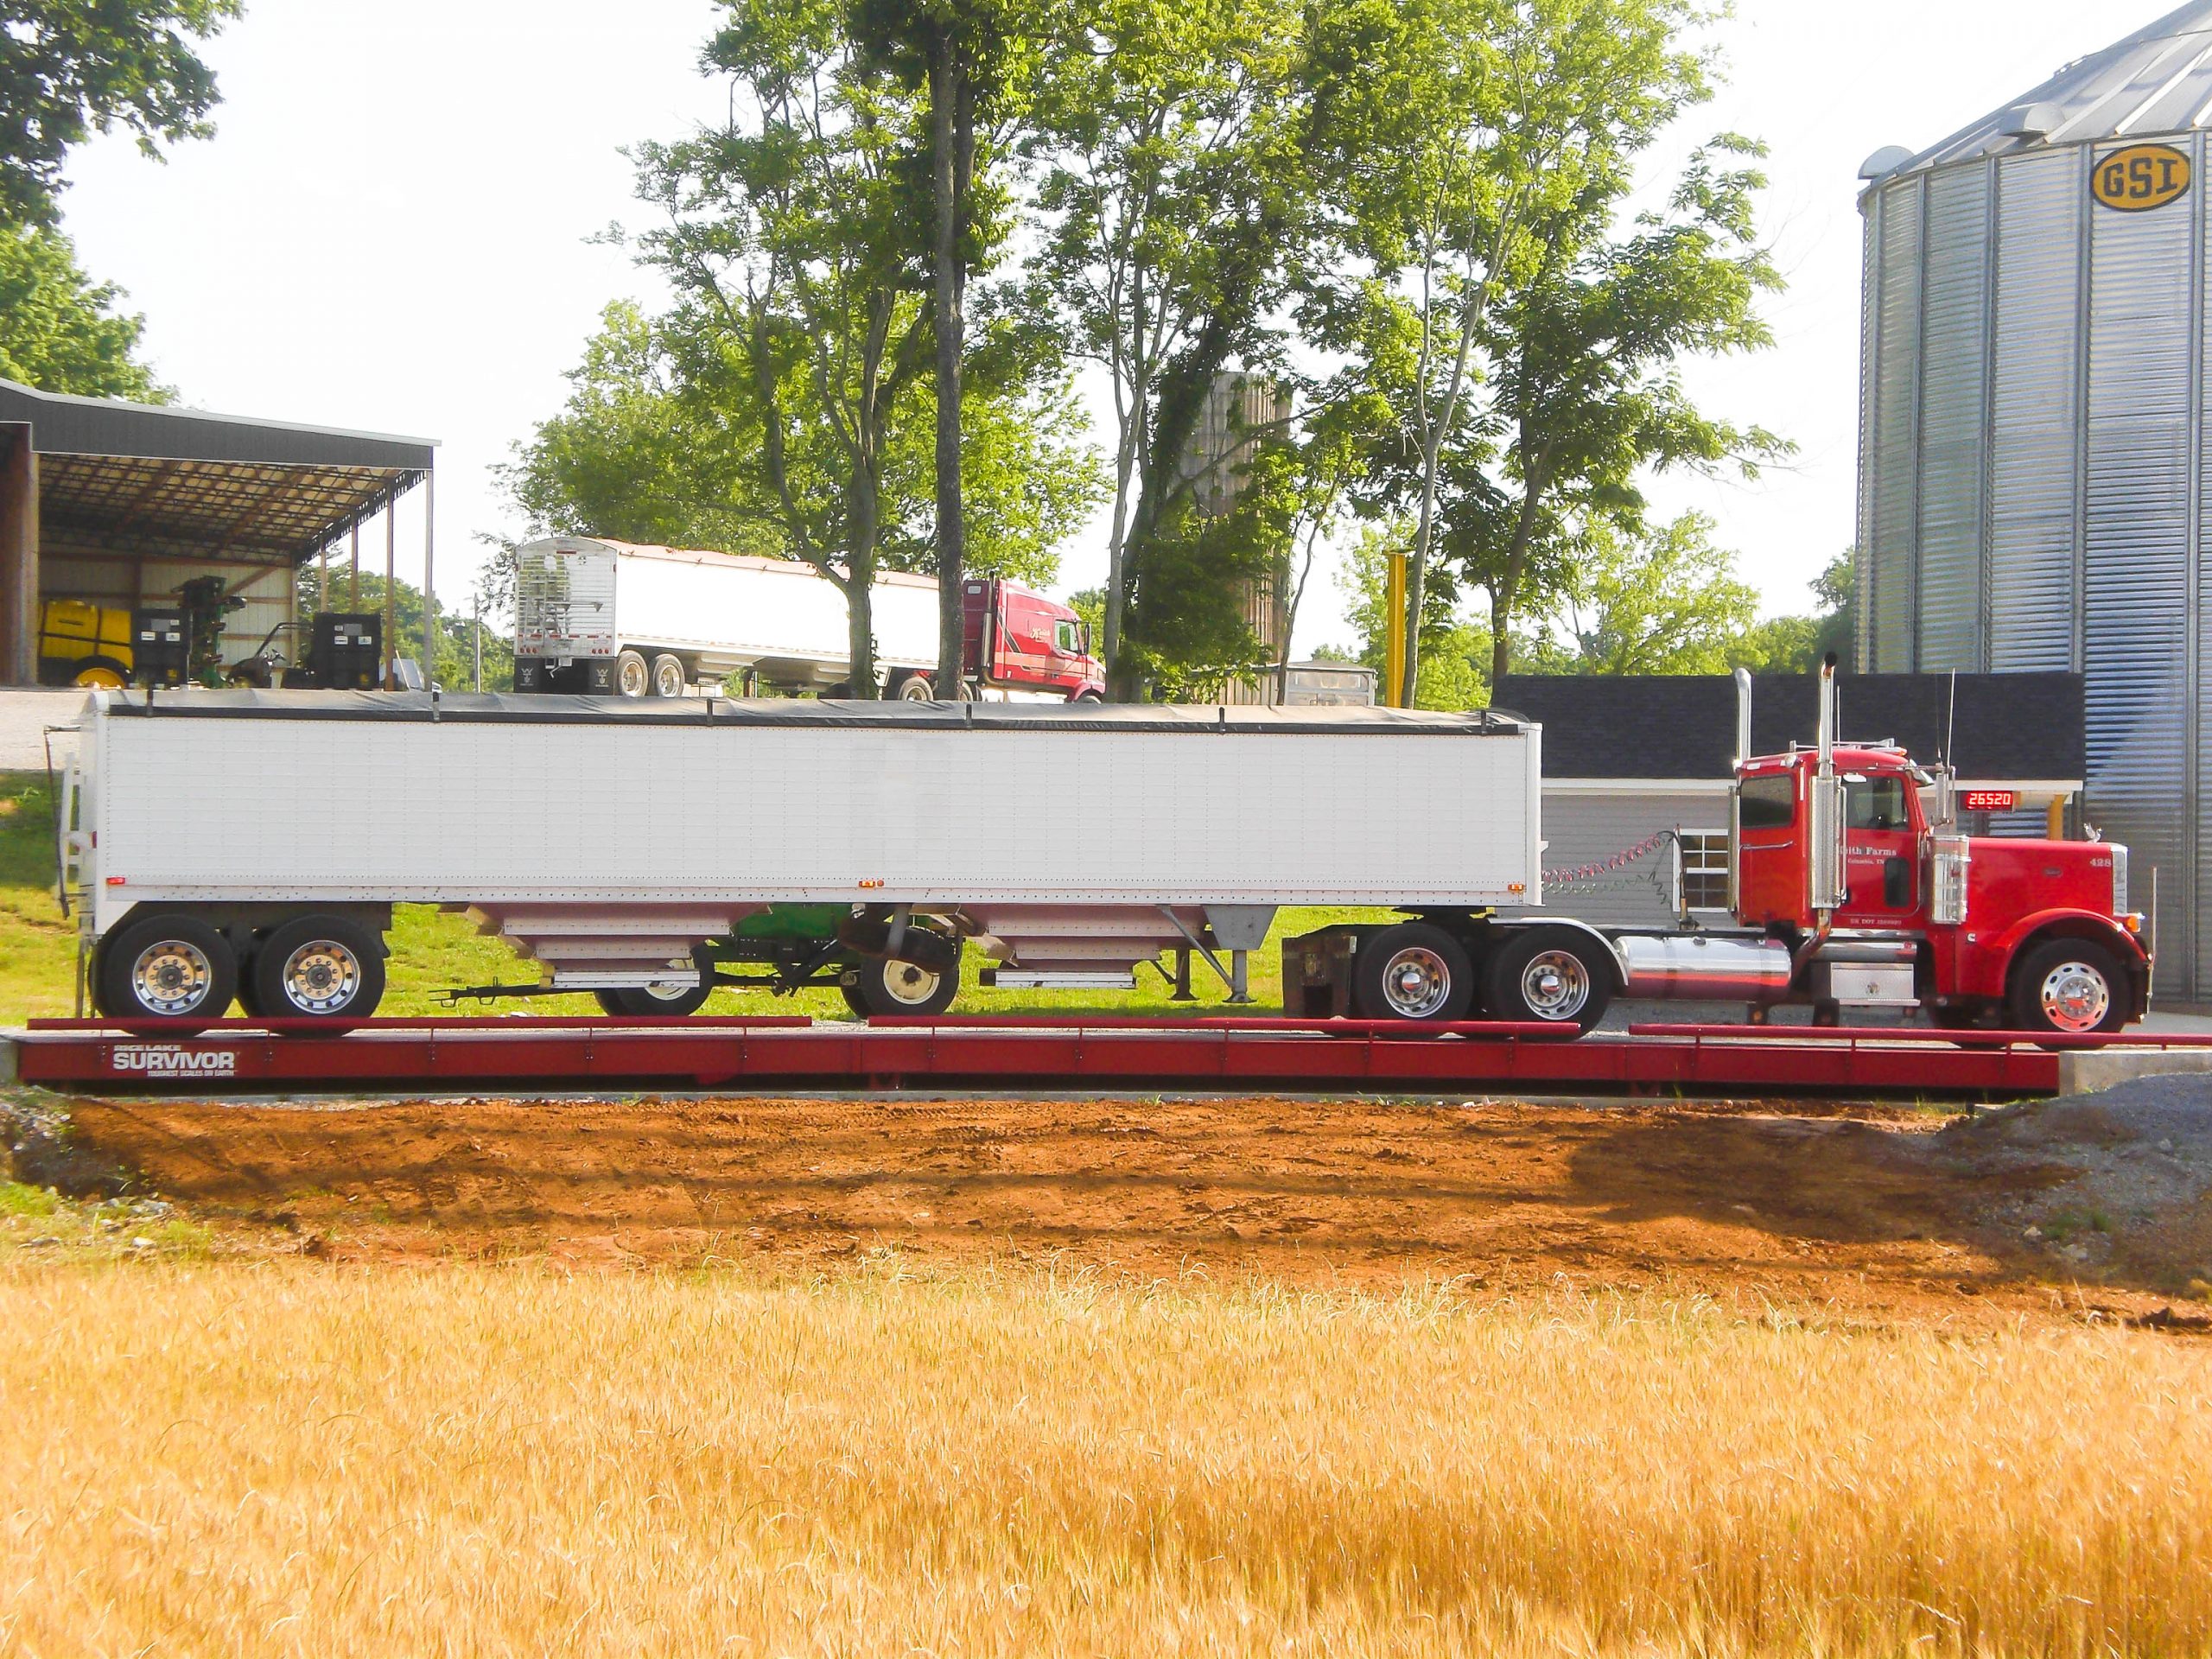 Certified Truck Scales for Farms to Weigh High Volume Truck Scale Loads.